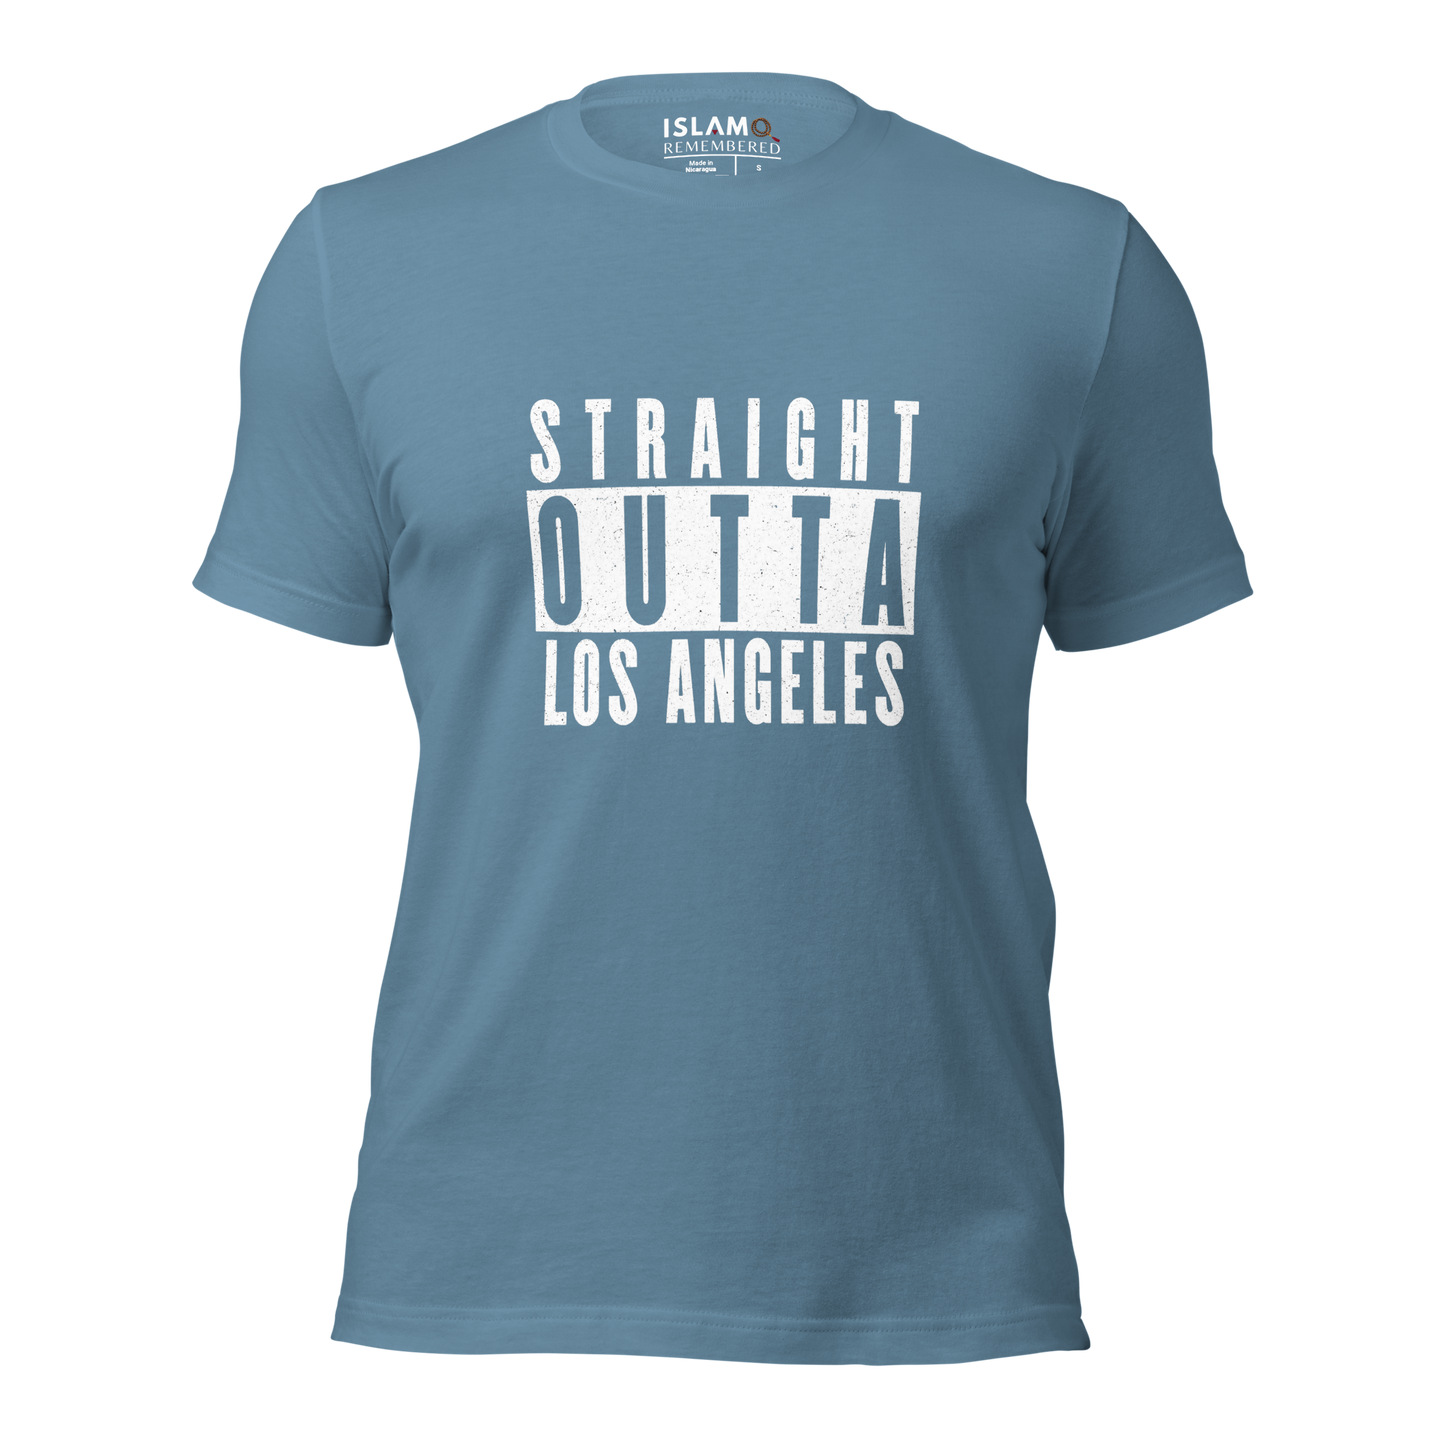 ADULT T-Shirt - STRAIGHT OUTTA LOS ANGELES